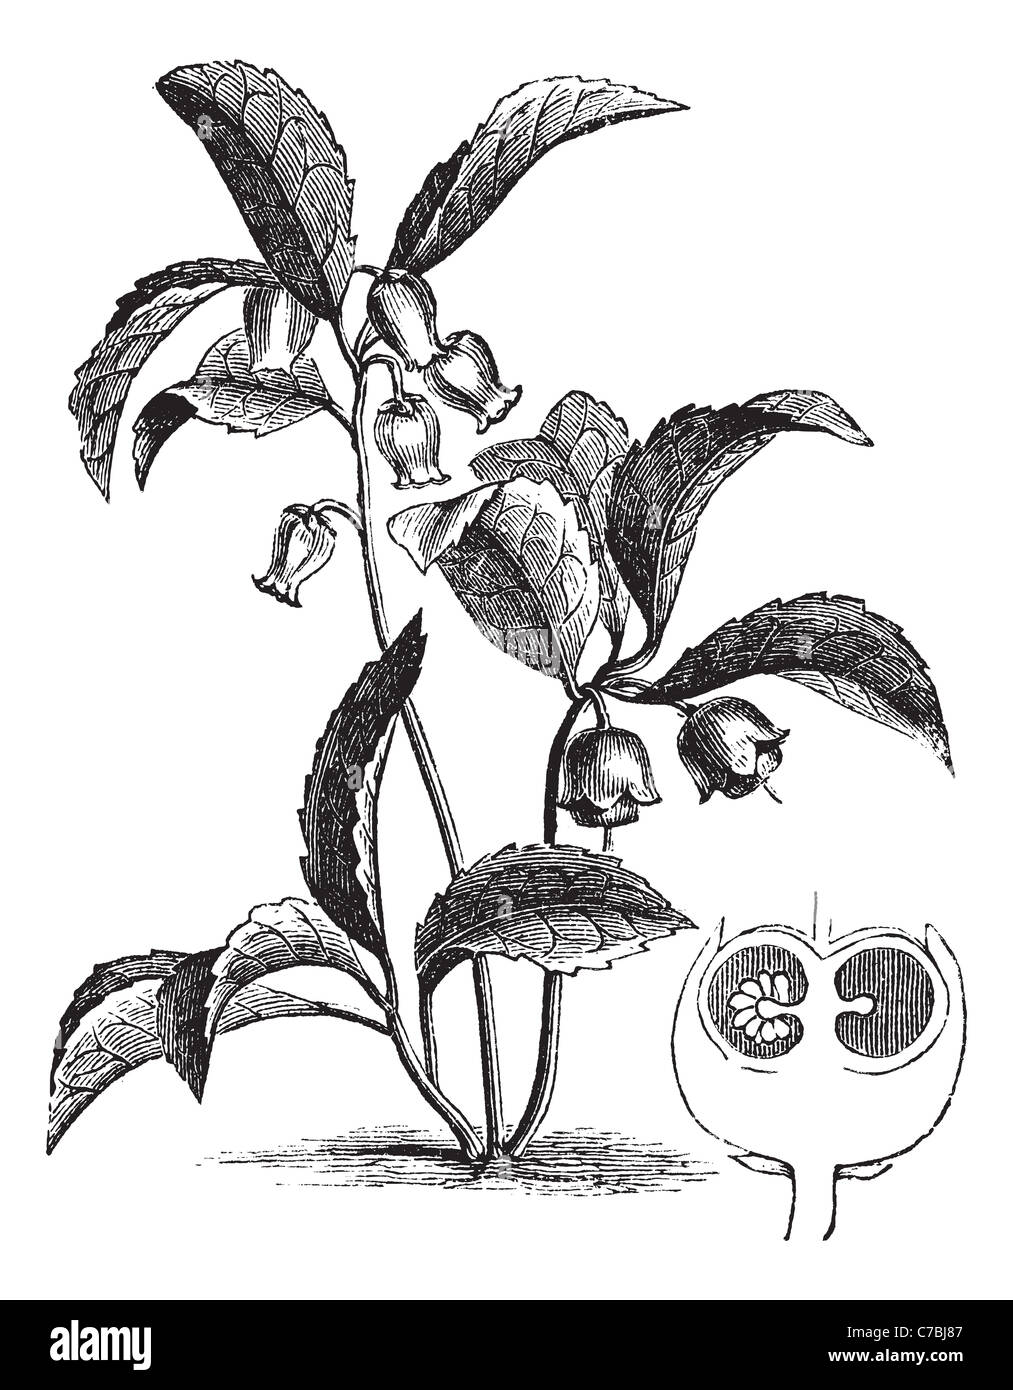 Gaultheria procumbens or Teaberry, vintage engraving. Old engraved illustration of Gaultheria procumbens and its fruit section. Stock Photo